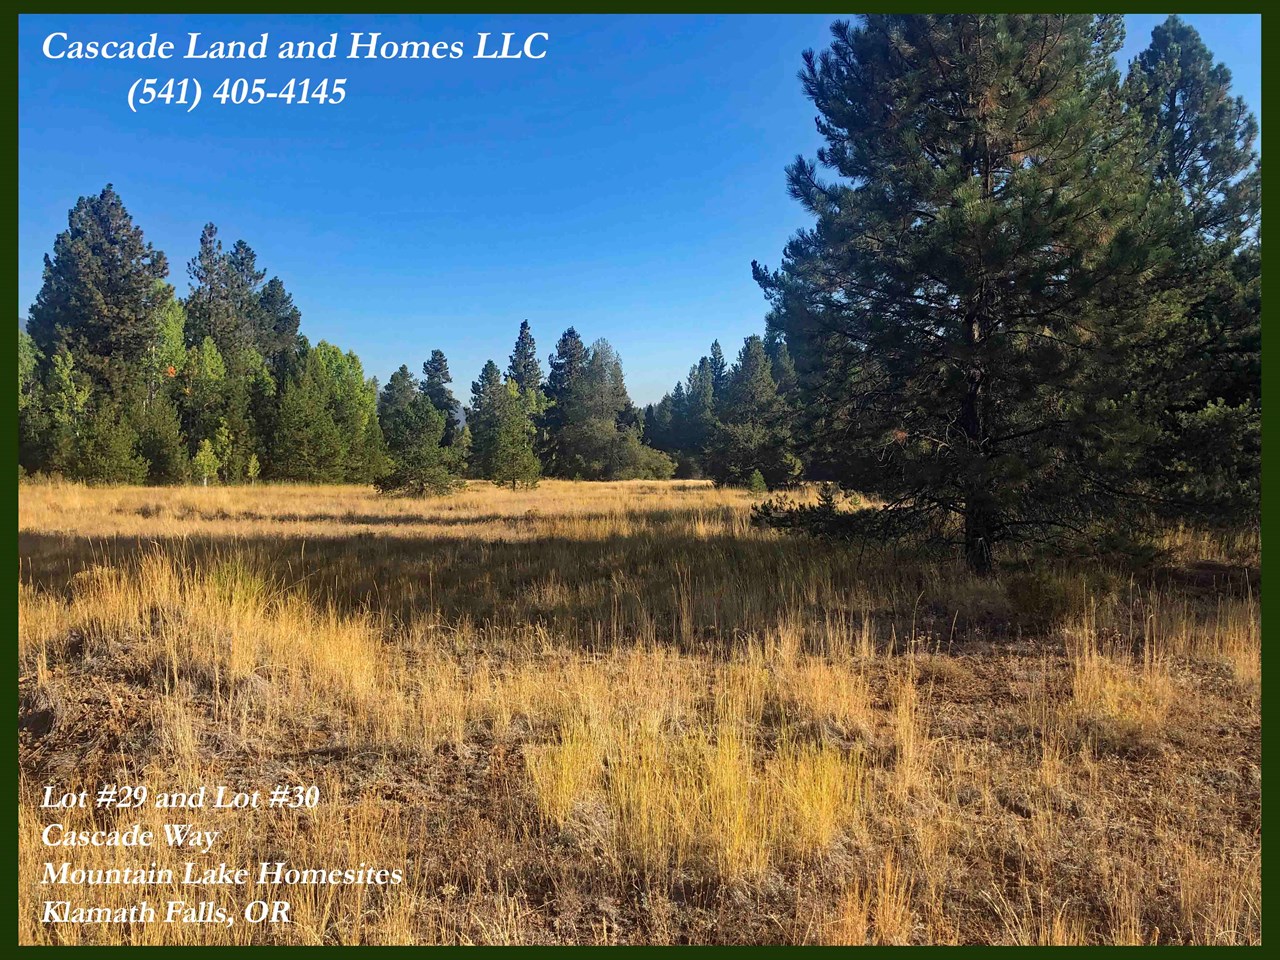 you would never know you are close to the city of klamath falls here. you are surrounded by trees and wilderness.